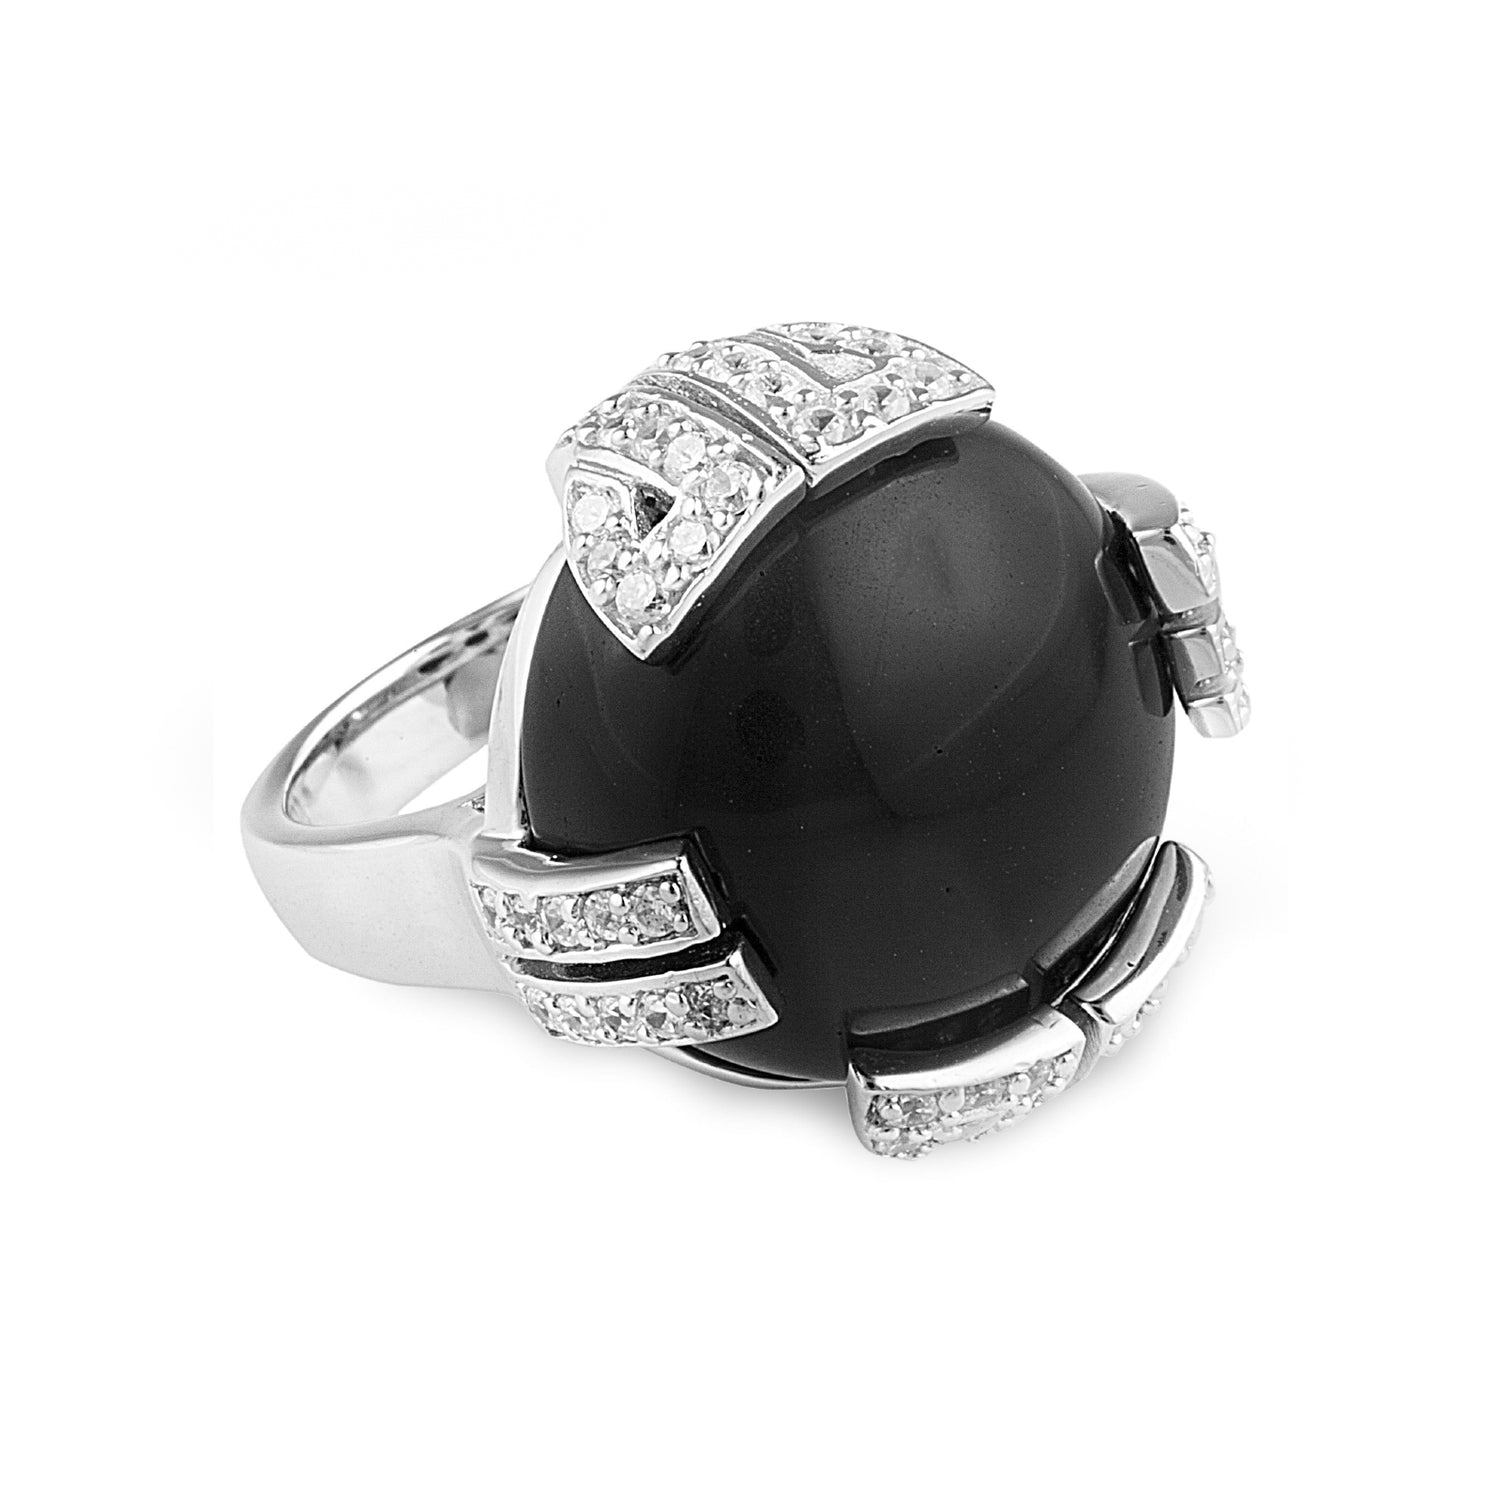 Onyx Secret Ring in 925 sterling silver with a polished black onyx stone held in place with geometric claws encrusted with cubic zirconia stones. Shop rings & affordable luxury jewellery by Bellagio & Co. Worldwide shipping